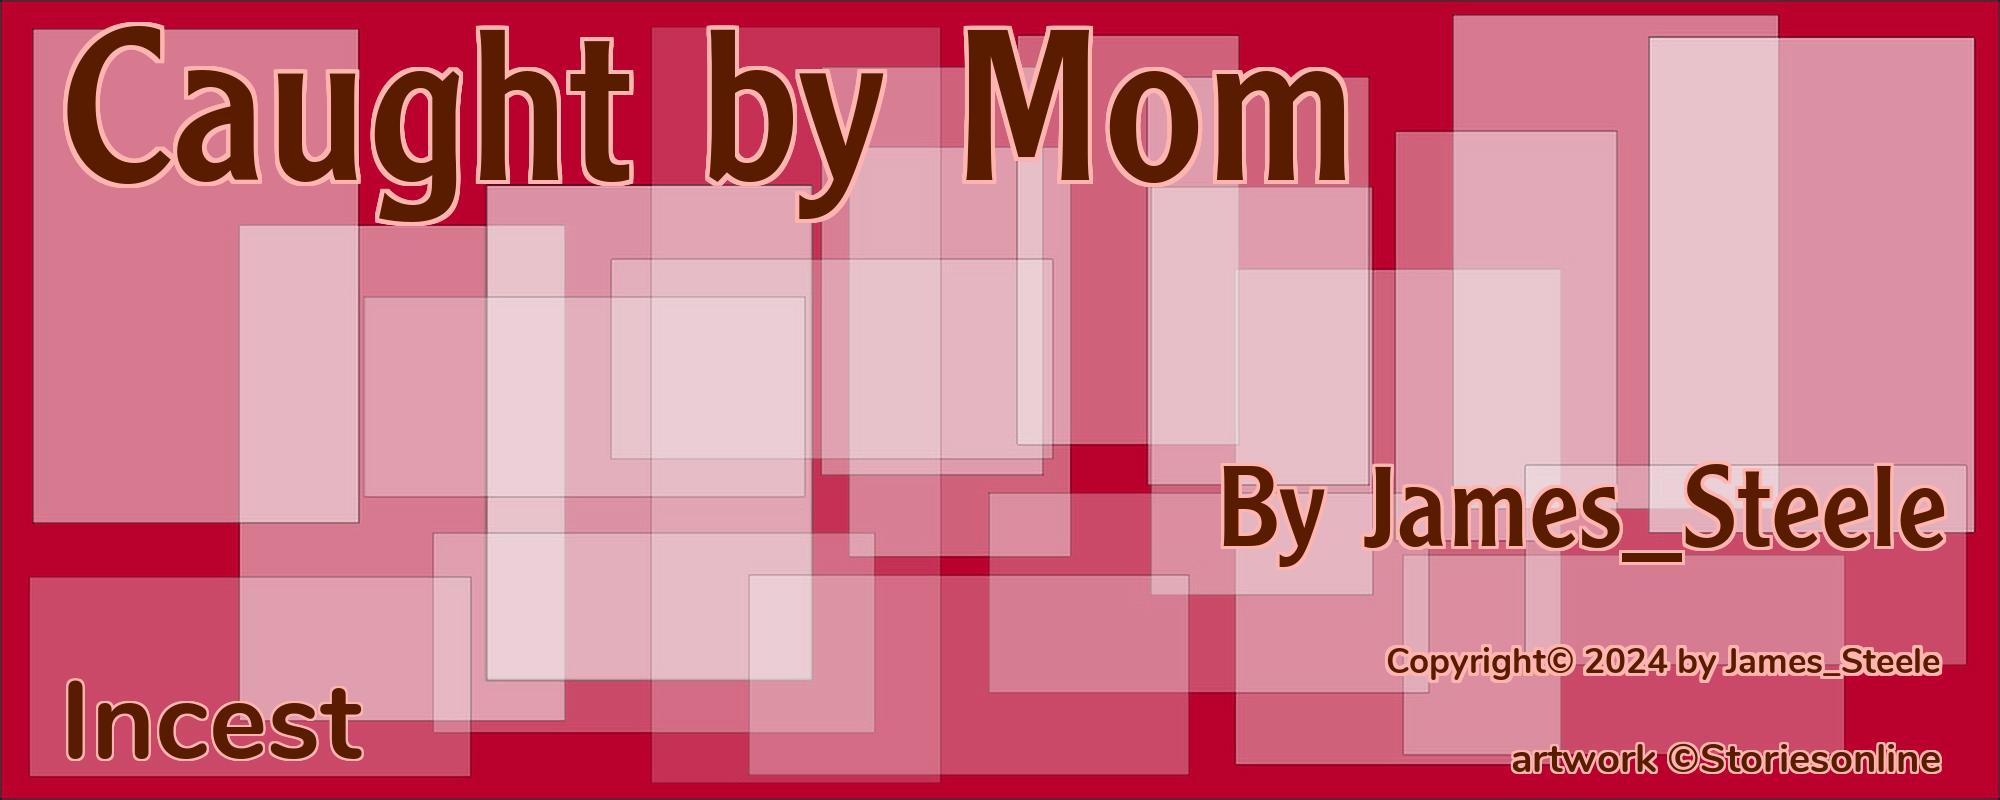 Caught by Mom - Cover